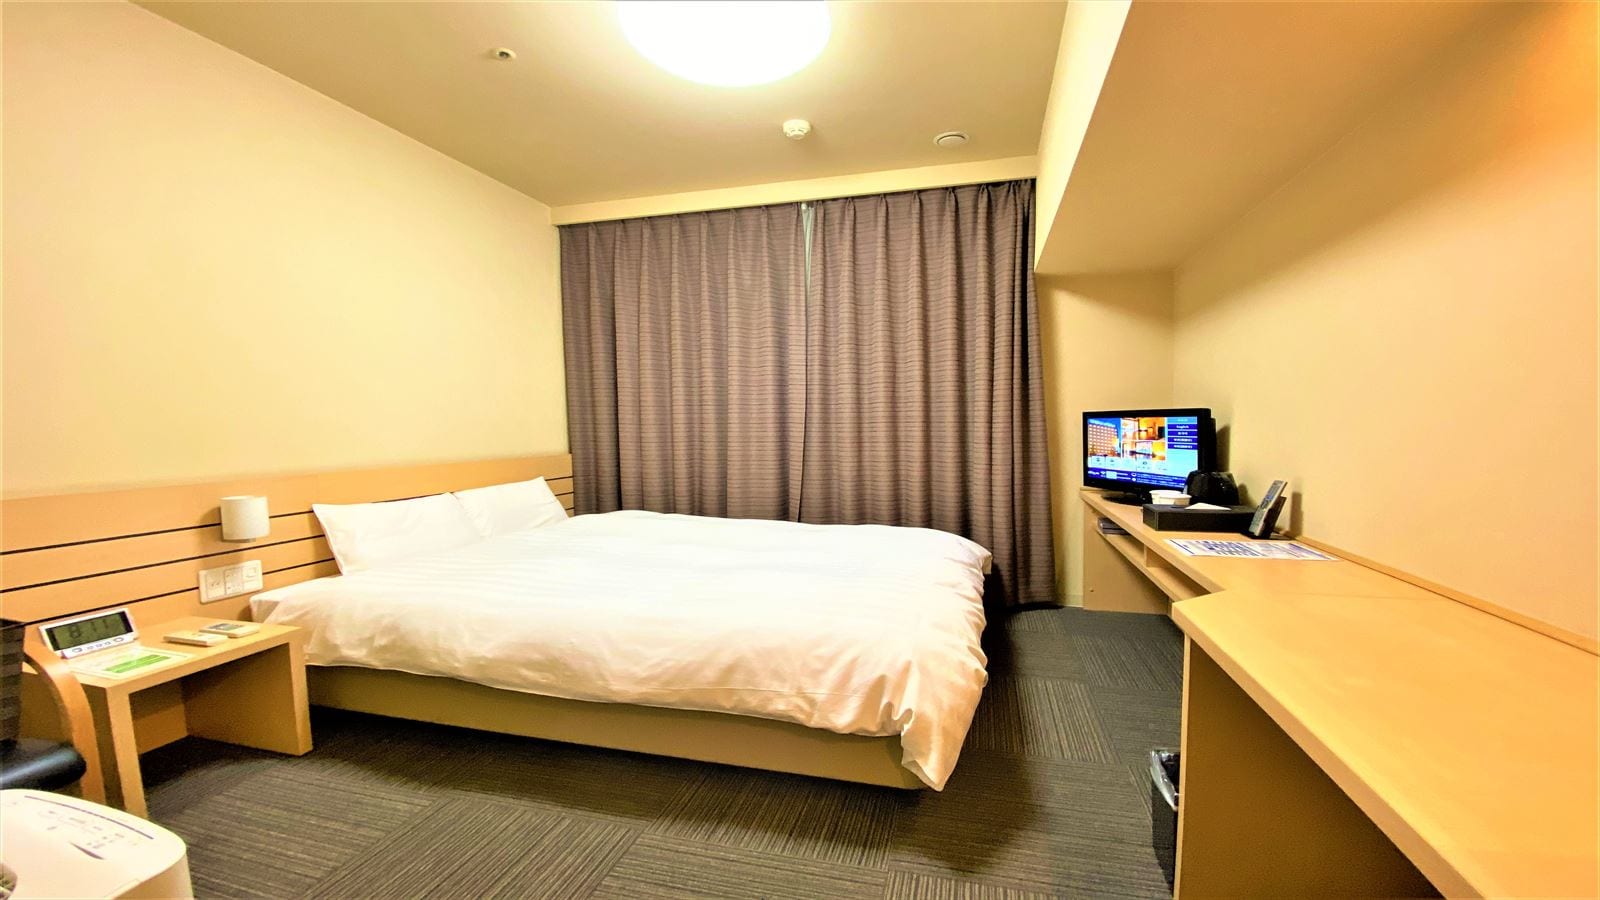 ◆ Non-smoking single / double room 15 square meters Bed size 140 cm & times; 195 cm